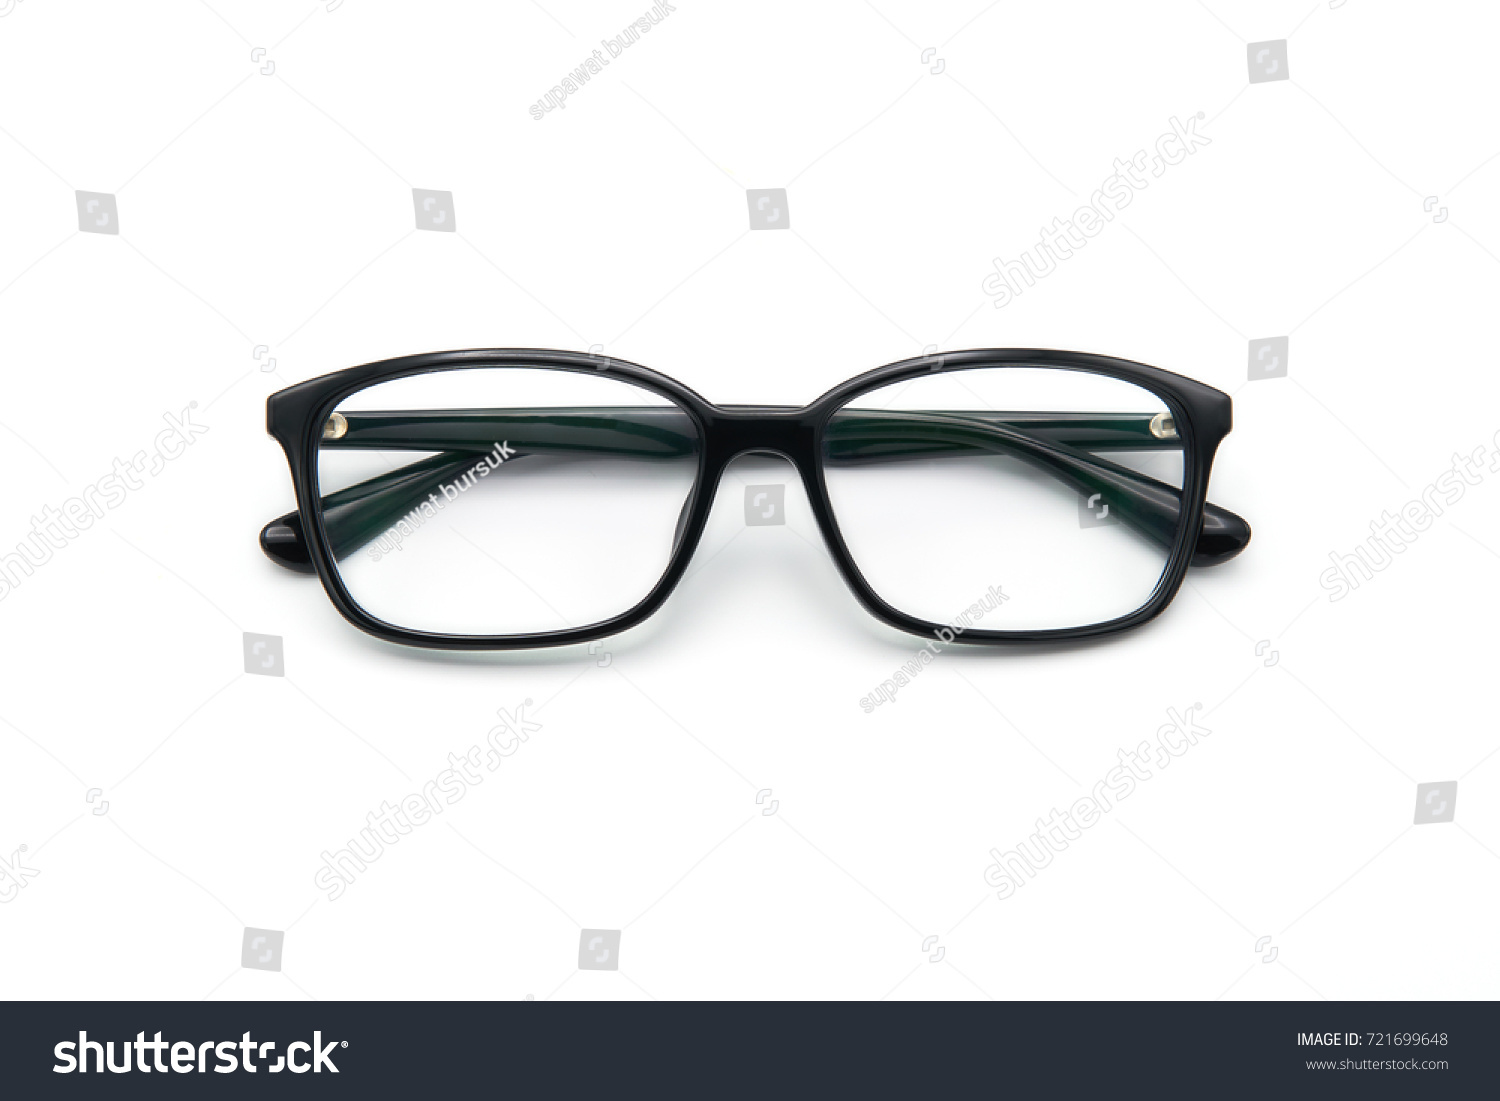 Black eye glasses spectacles with shiny black frame For reading daily life To a person with visual impairment. White background as background health  concept with copy space. #721699648